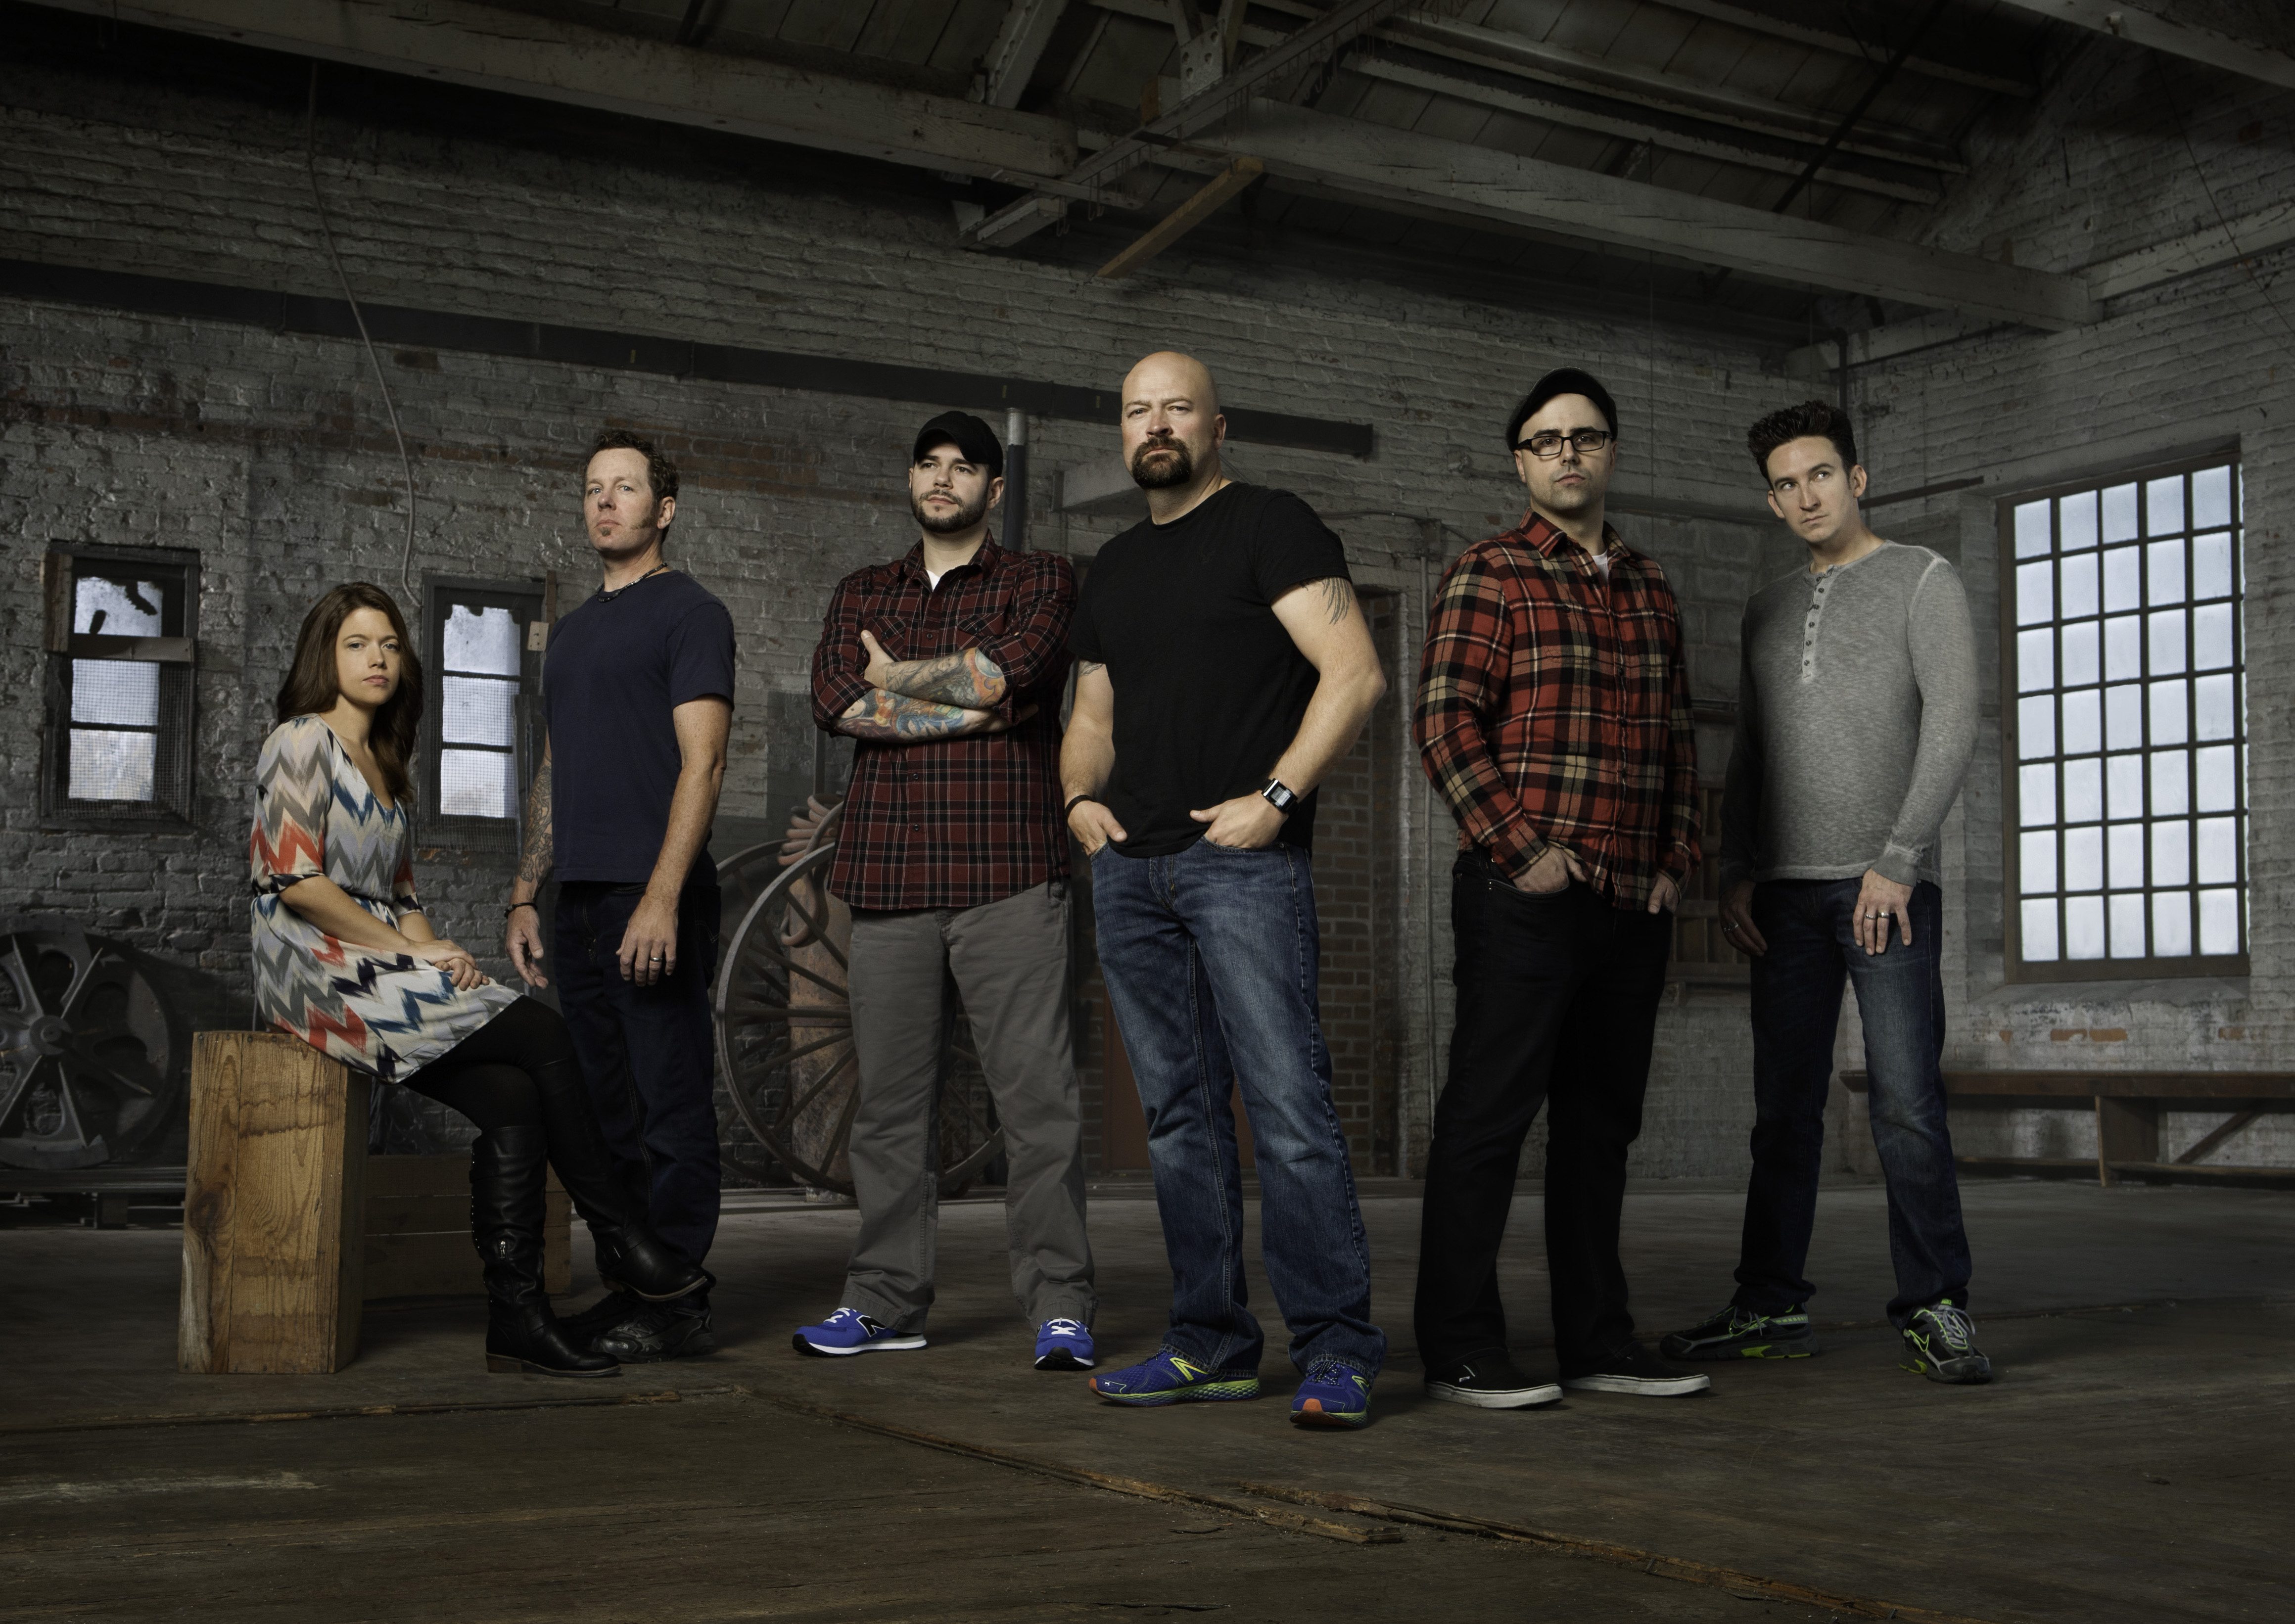 Ghost Hunters Season 10 Crew!  Image courtesy of SyFy Channel and used with permission